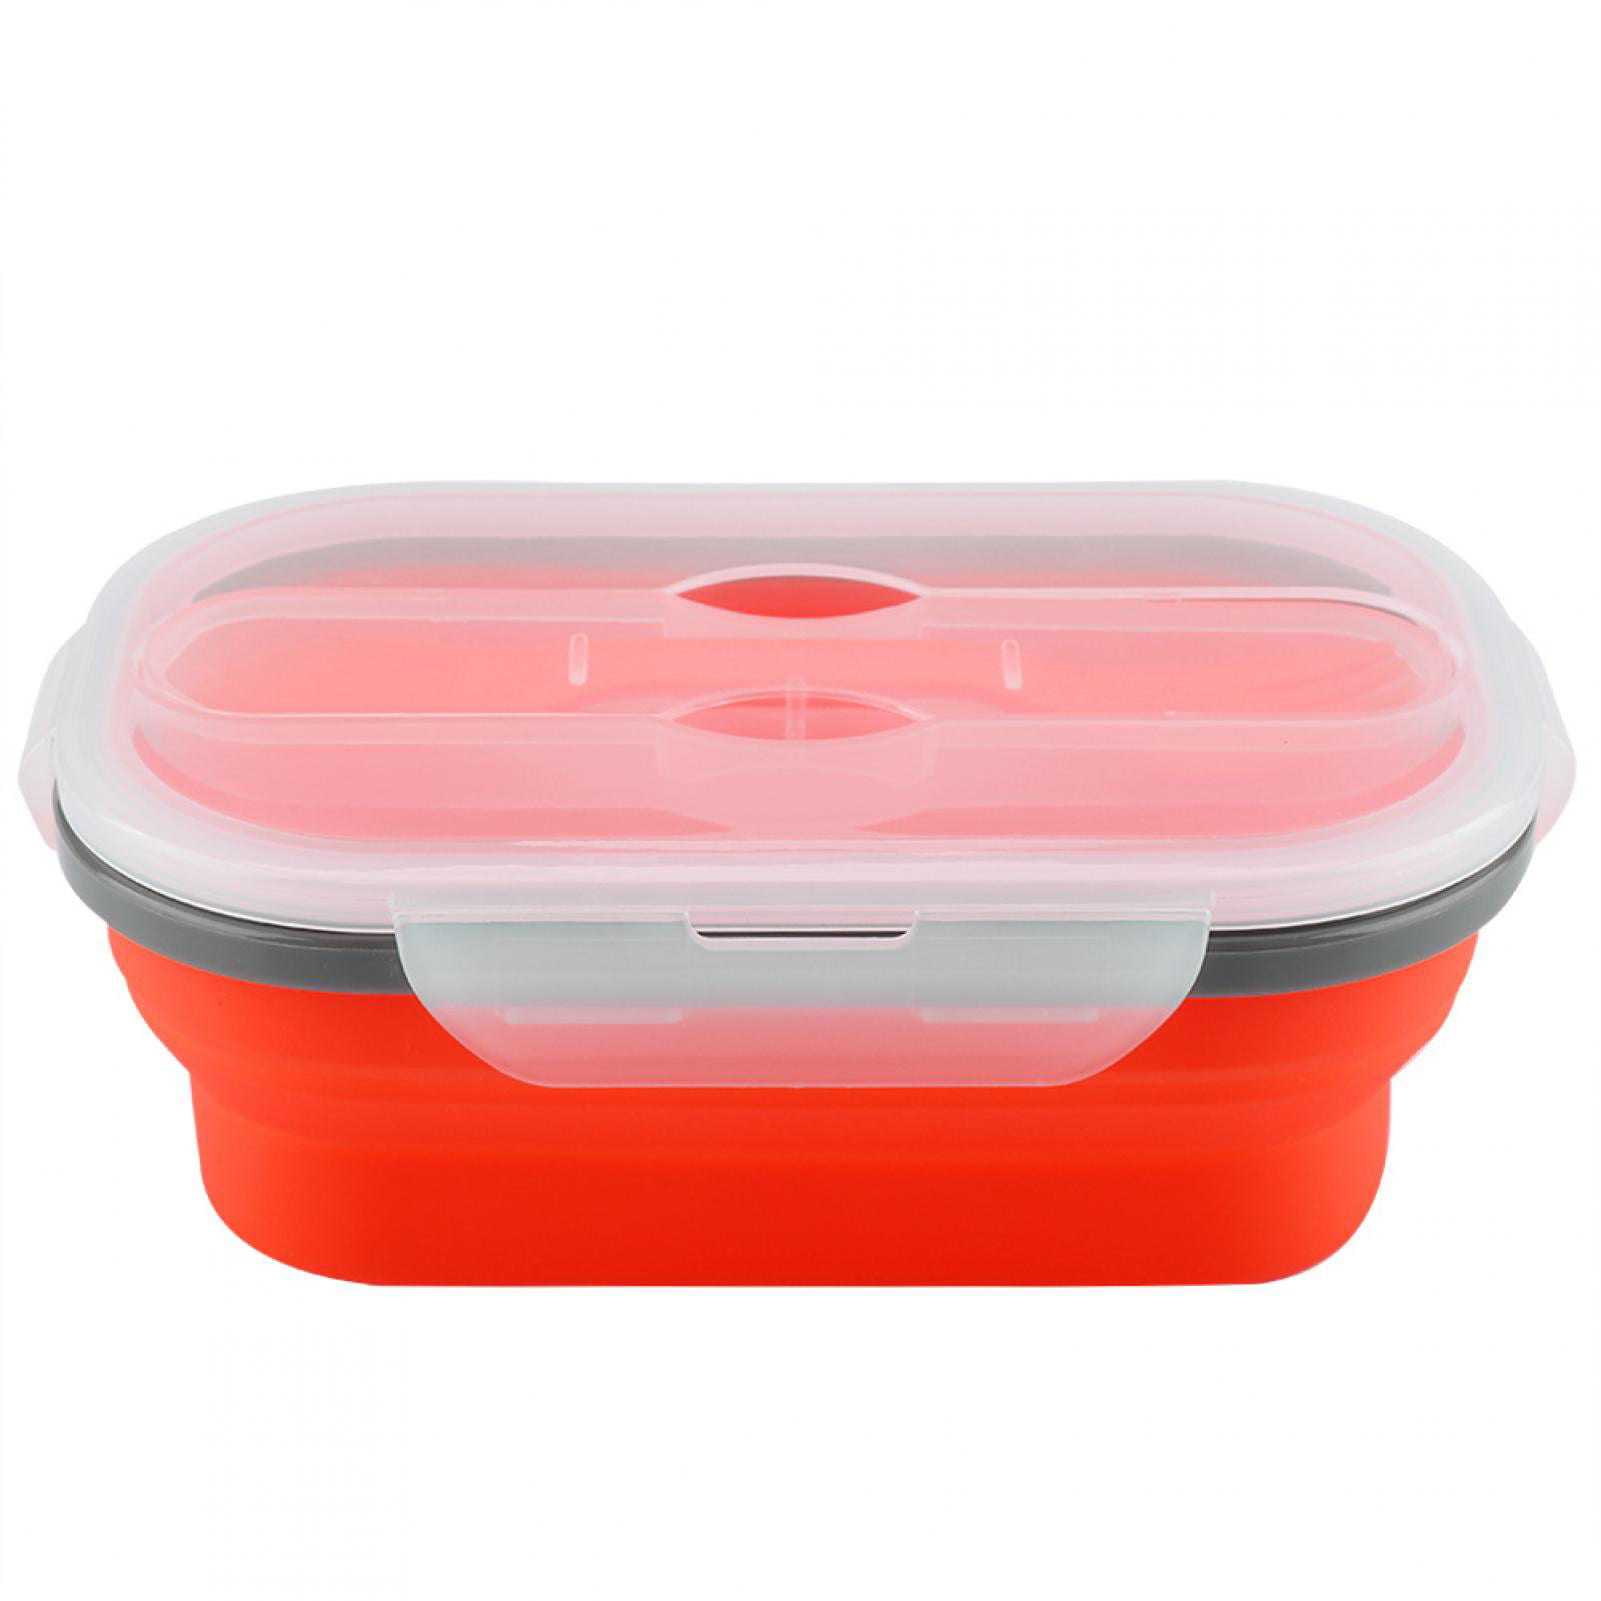 Details about   NEW Lunch Box All Boxed Up Food Storage Container Eco Friendly Pizza Slice Schoo 